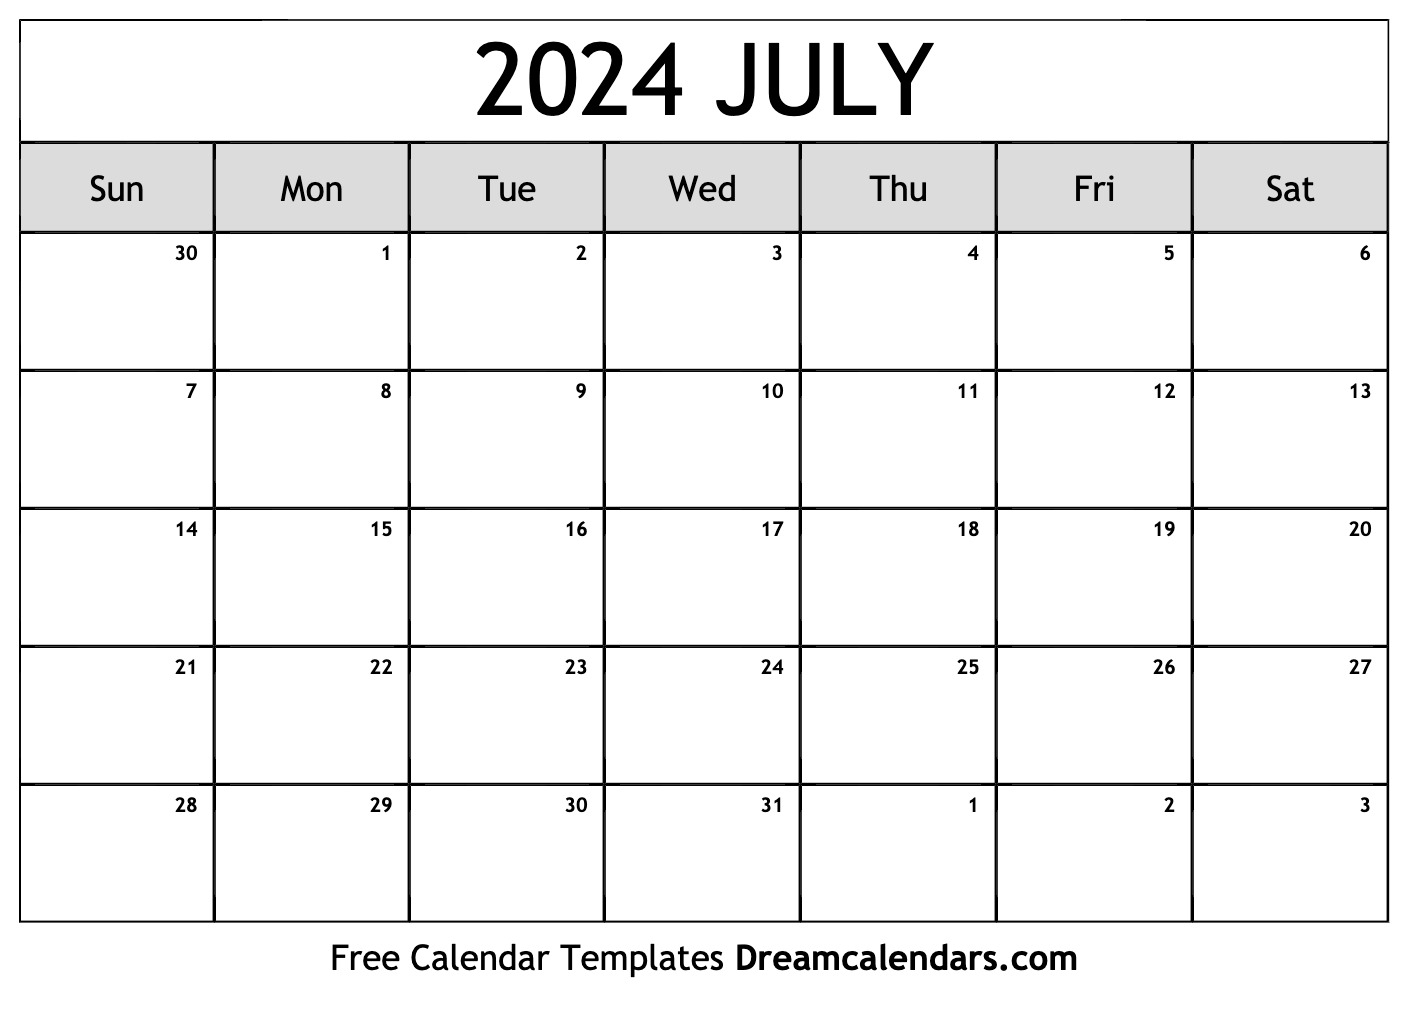 July 2024 Calendar | Free Blank Printable With Holidays for Calendar July 2024 Free Printable